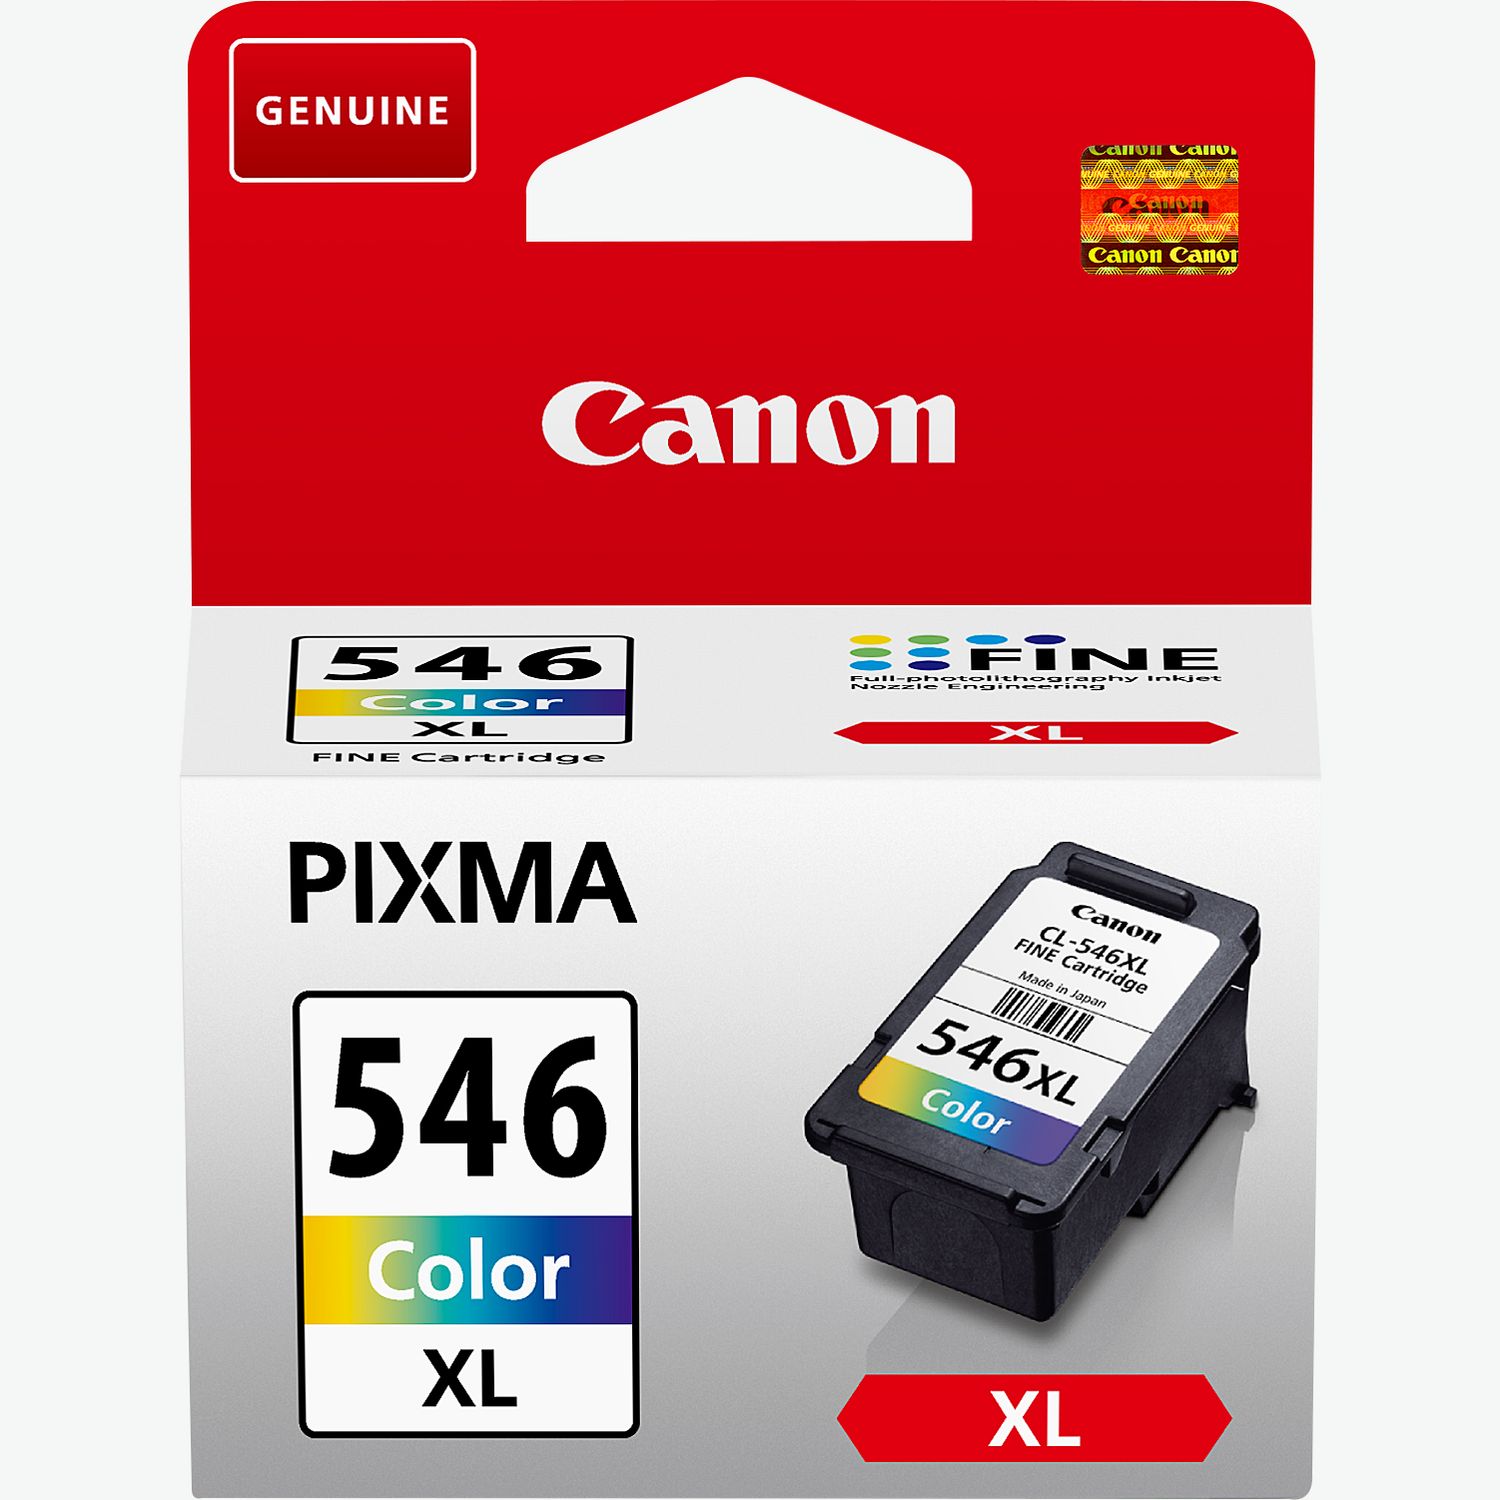 Canon PIXMA MG2555s Ink Cartridge Replacement. 